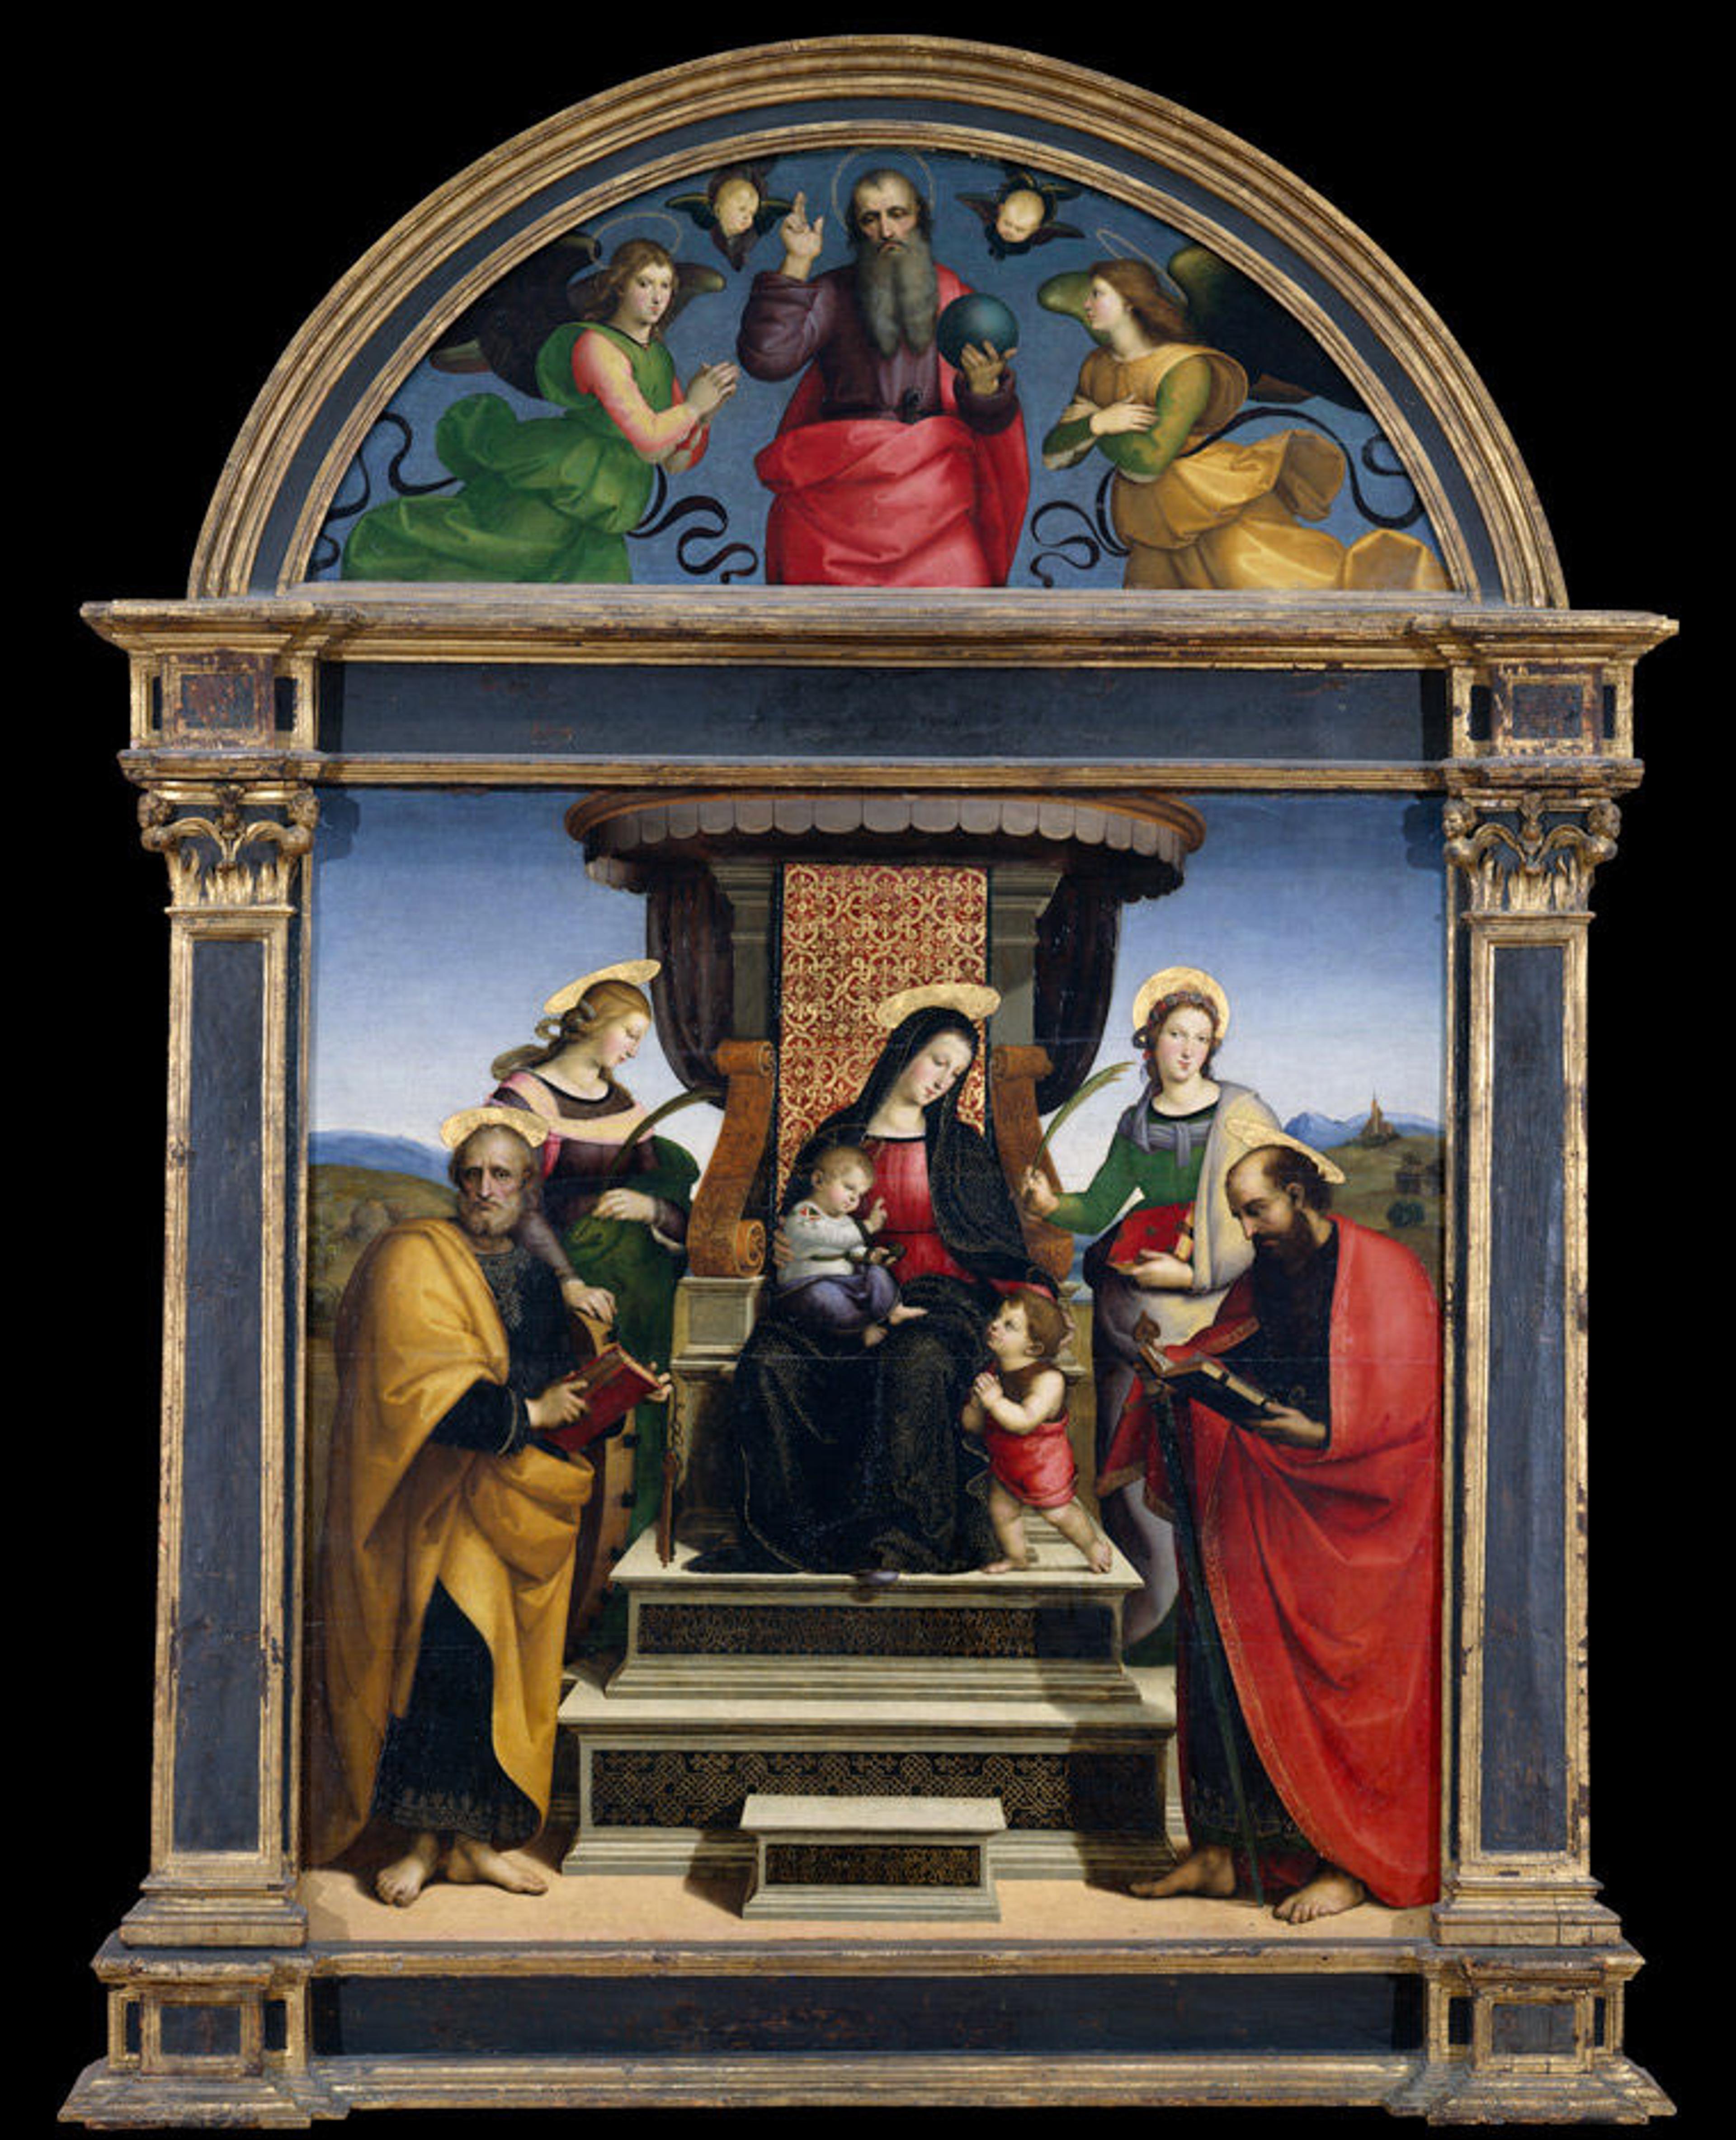 An altarpiece by Raphael depicting Madonna with the baby Jesus on a throne surrounded by saints in brightly colored robes